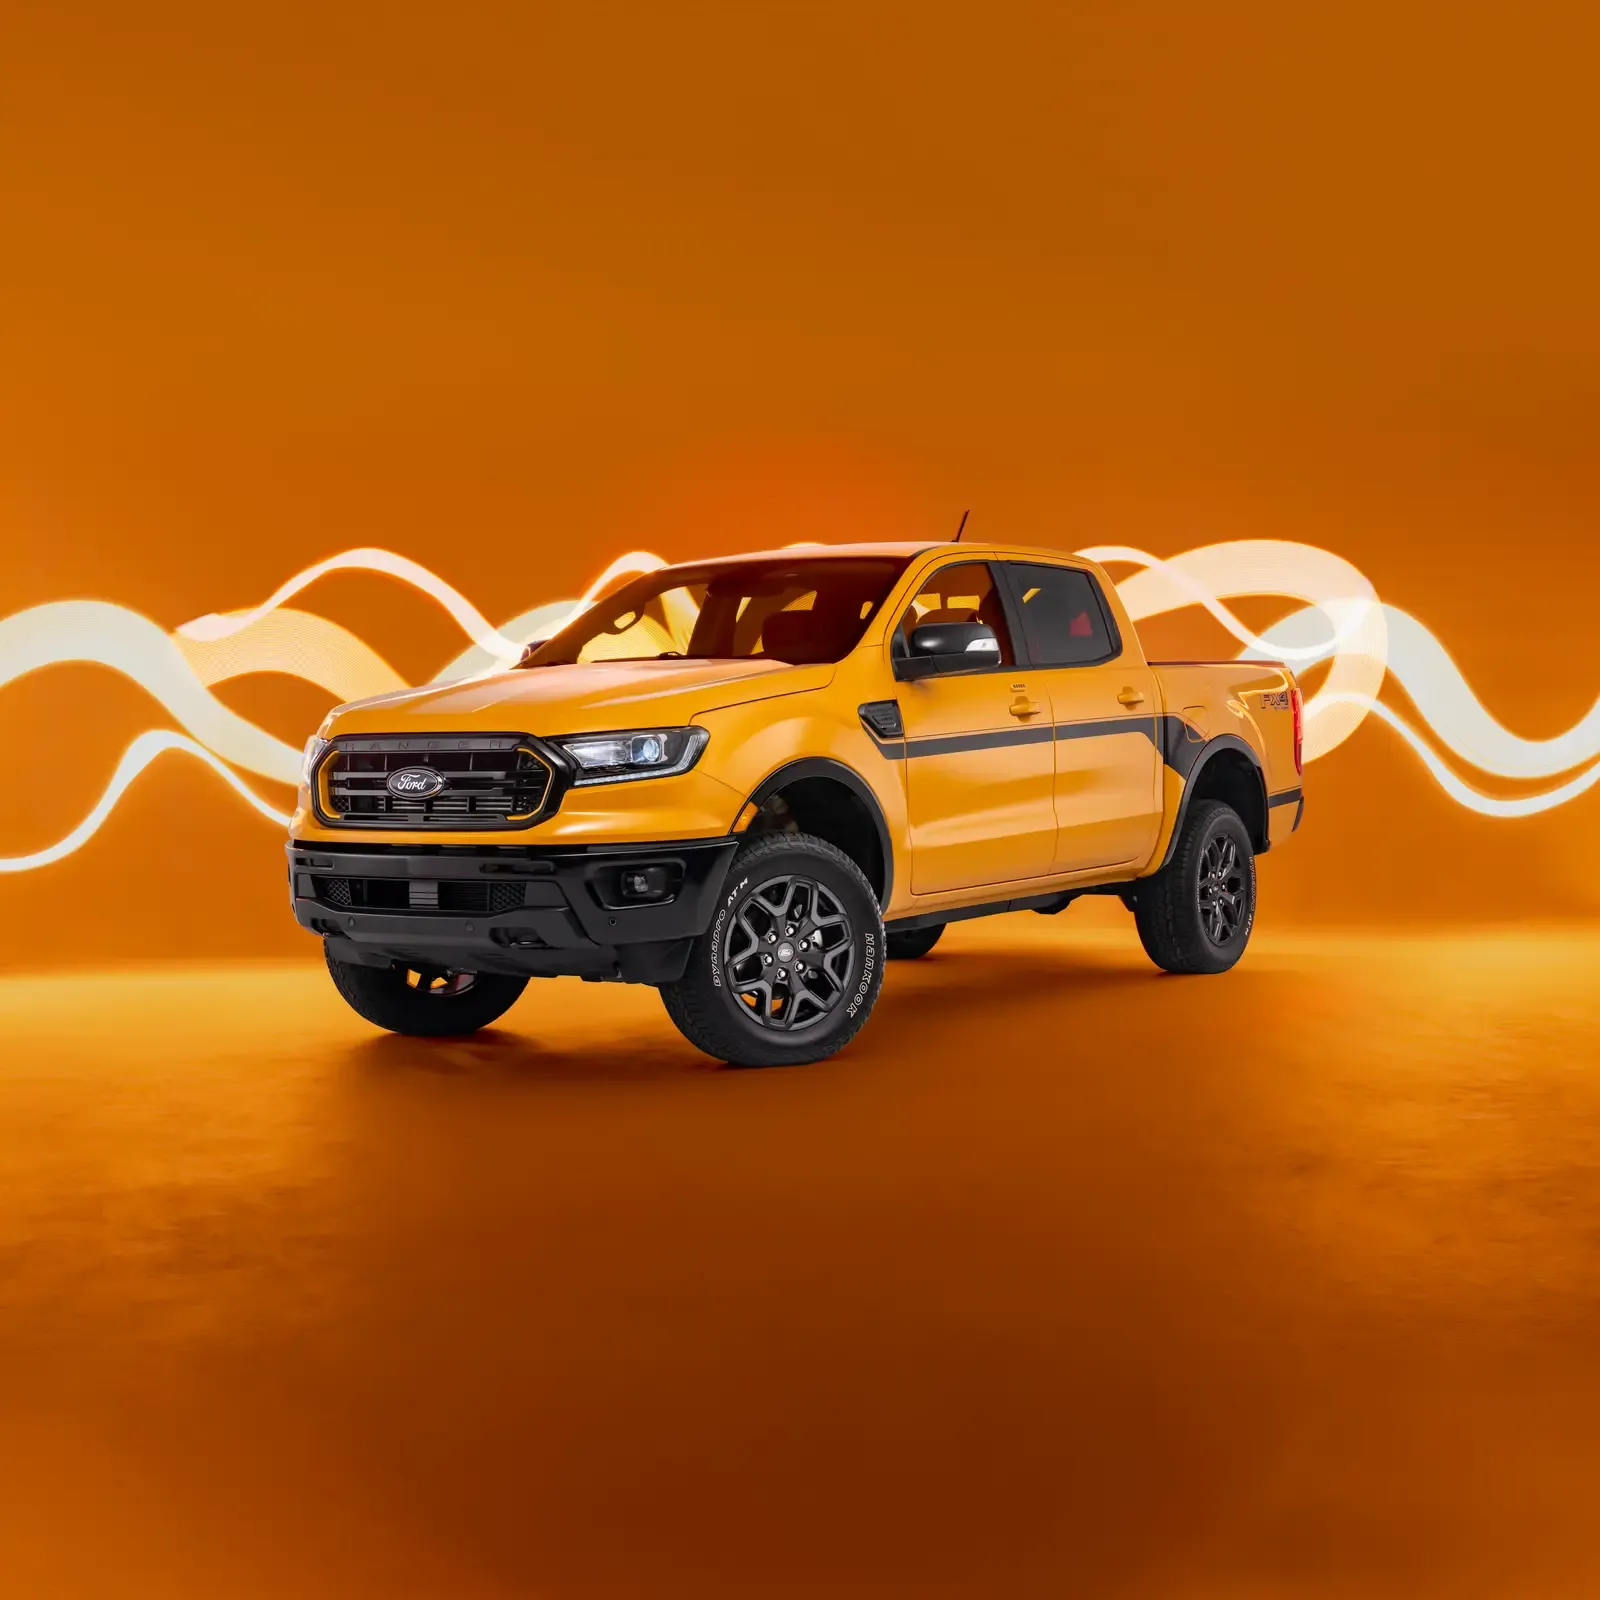 The 2022 Ford Ranger Splash Limited Edition's Exterior